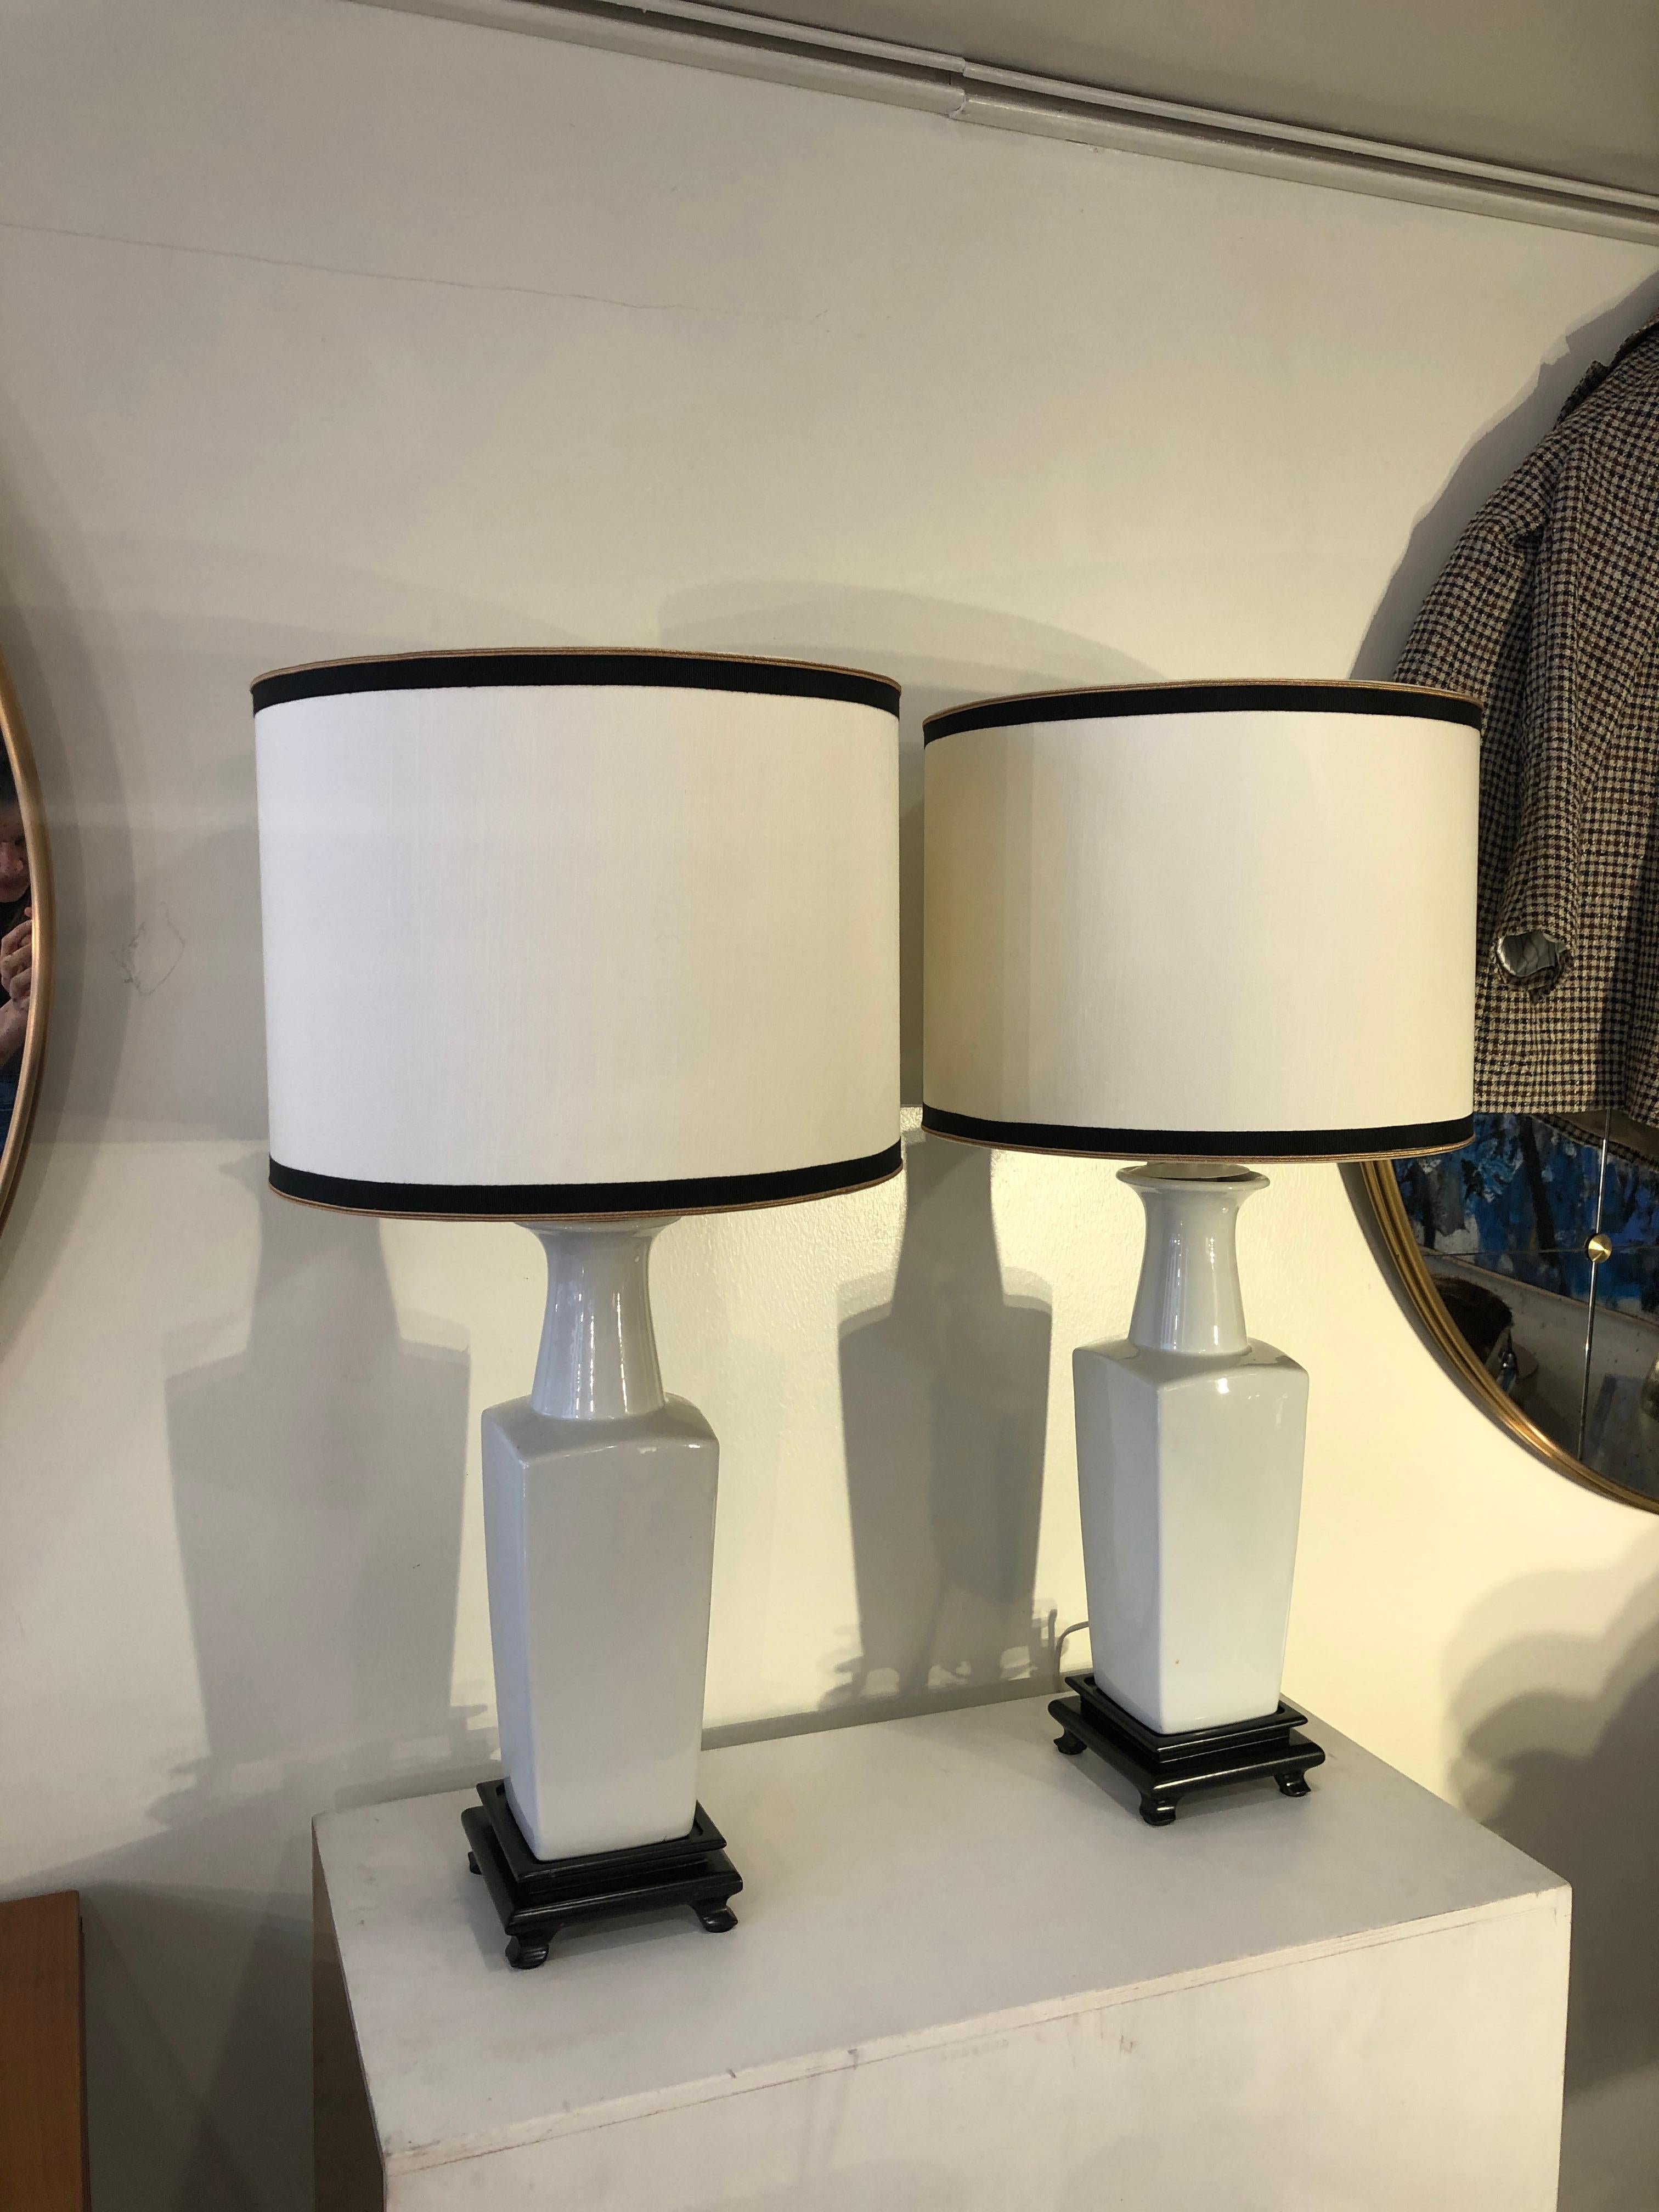 Early 20th century. Pair of white ceramic table lamps , chinoiserie style.
Pair of white chinoiserie ceramic table lamps with wooden Black base.
A video of these lamps is available upon request.
We have add new lampshade, which are customizable